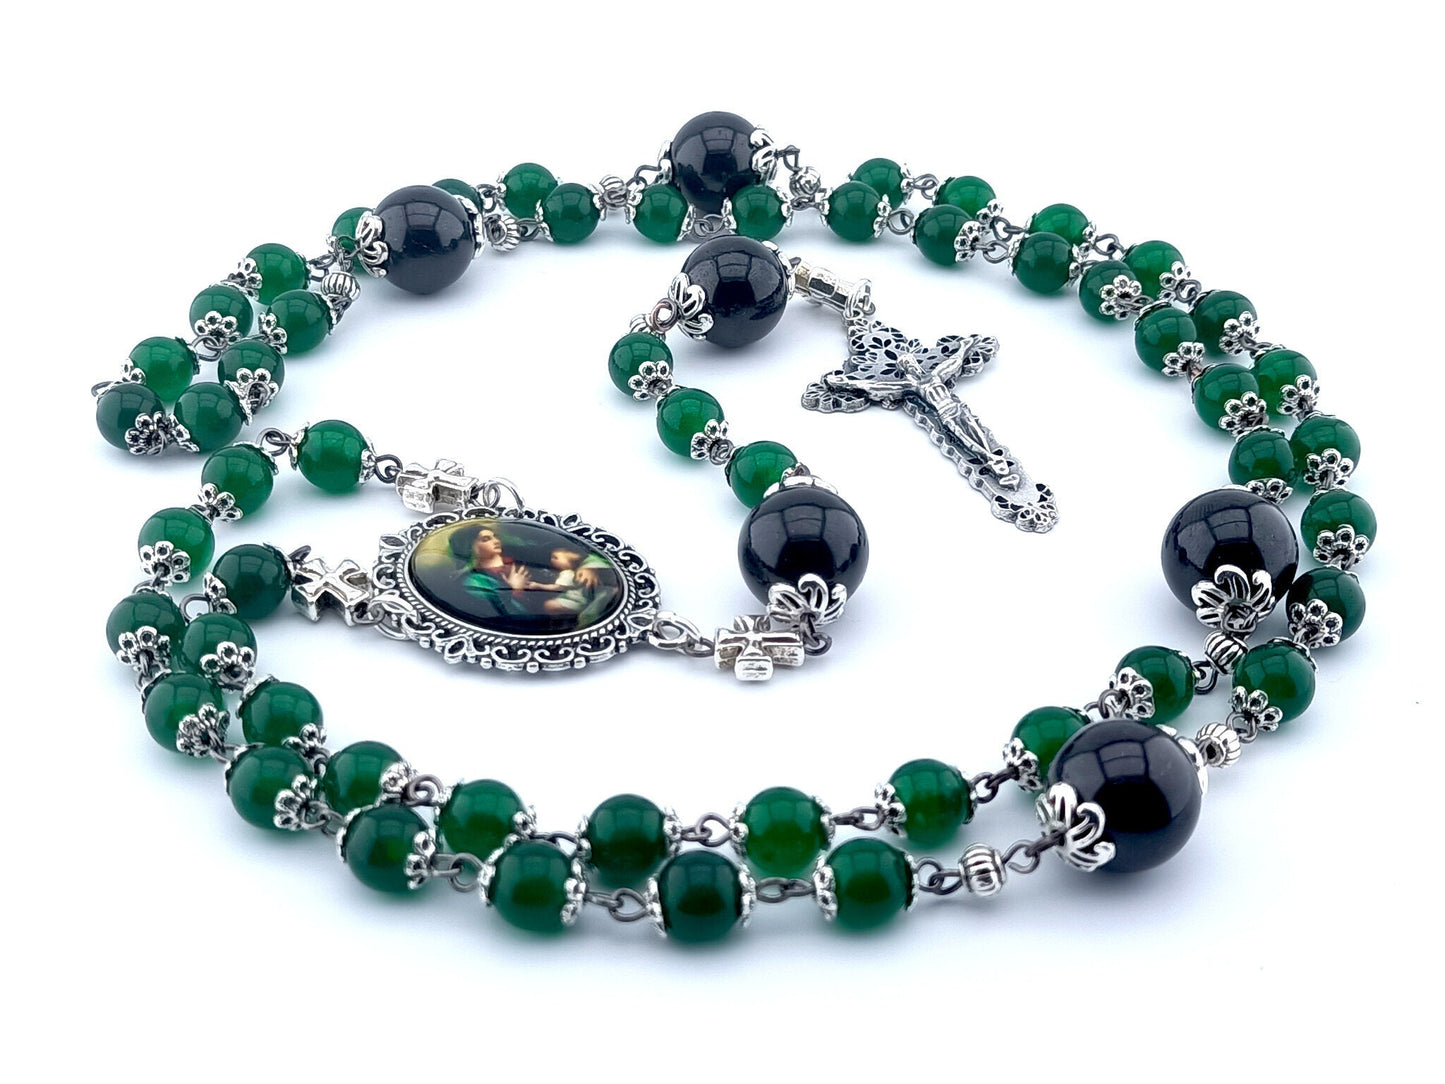 The Nativity unique rosary beads with green jasper gemstone beads, silver crucifix and picture centre medal, large garnet pater beads and silver bead caps and cross linking beads.